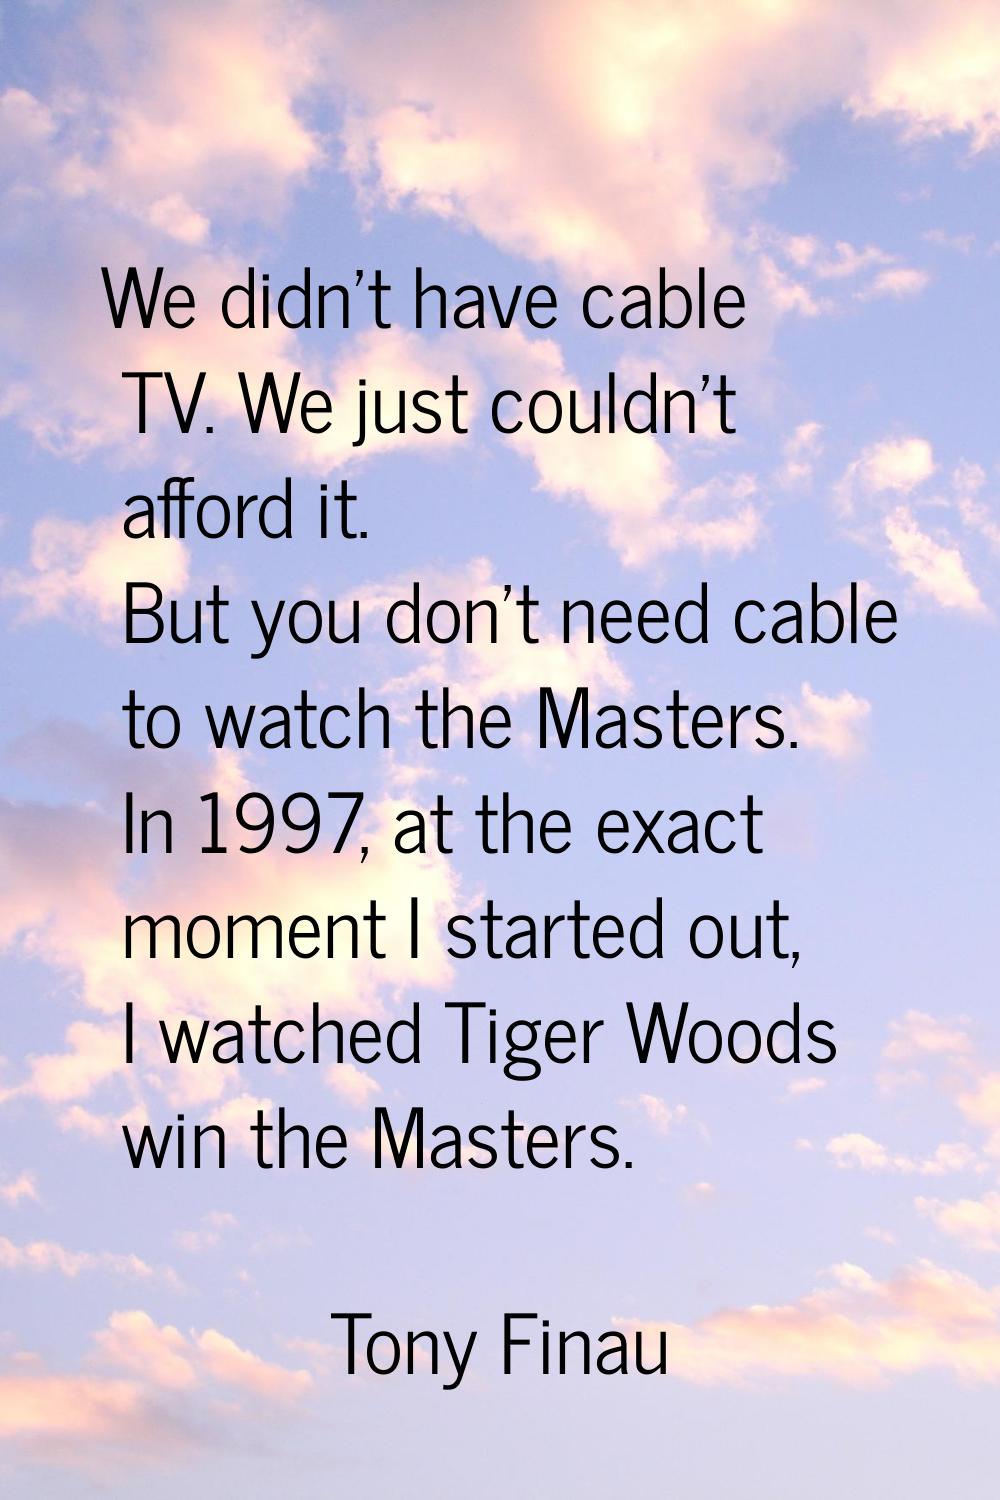 We didn't have cable TV. We just couldn't afford it. But you don't need cable to watch the Masters.